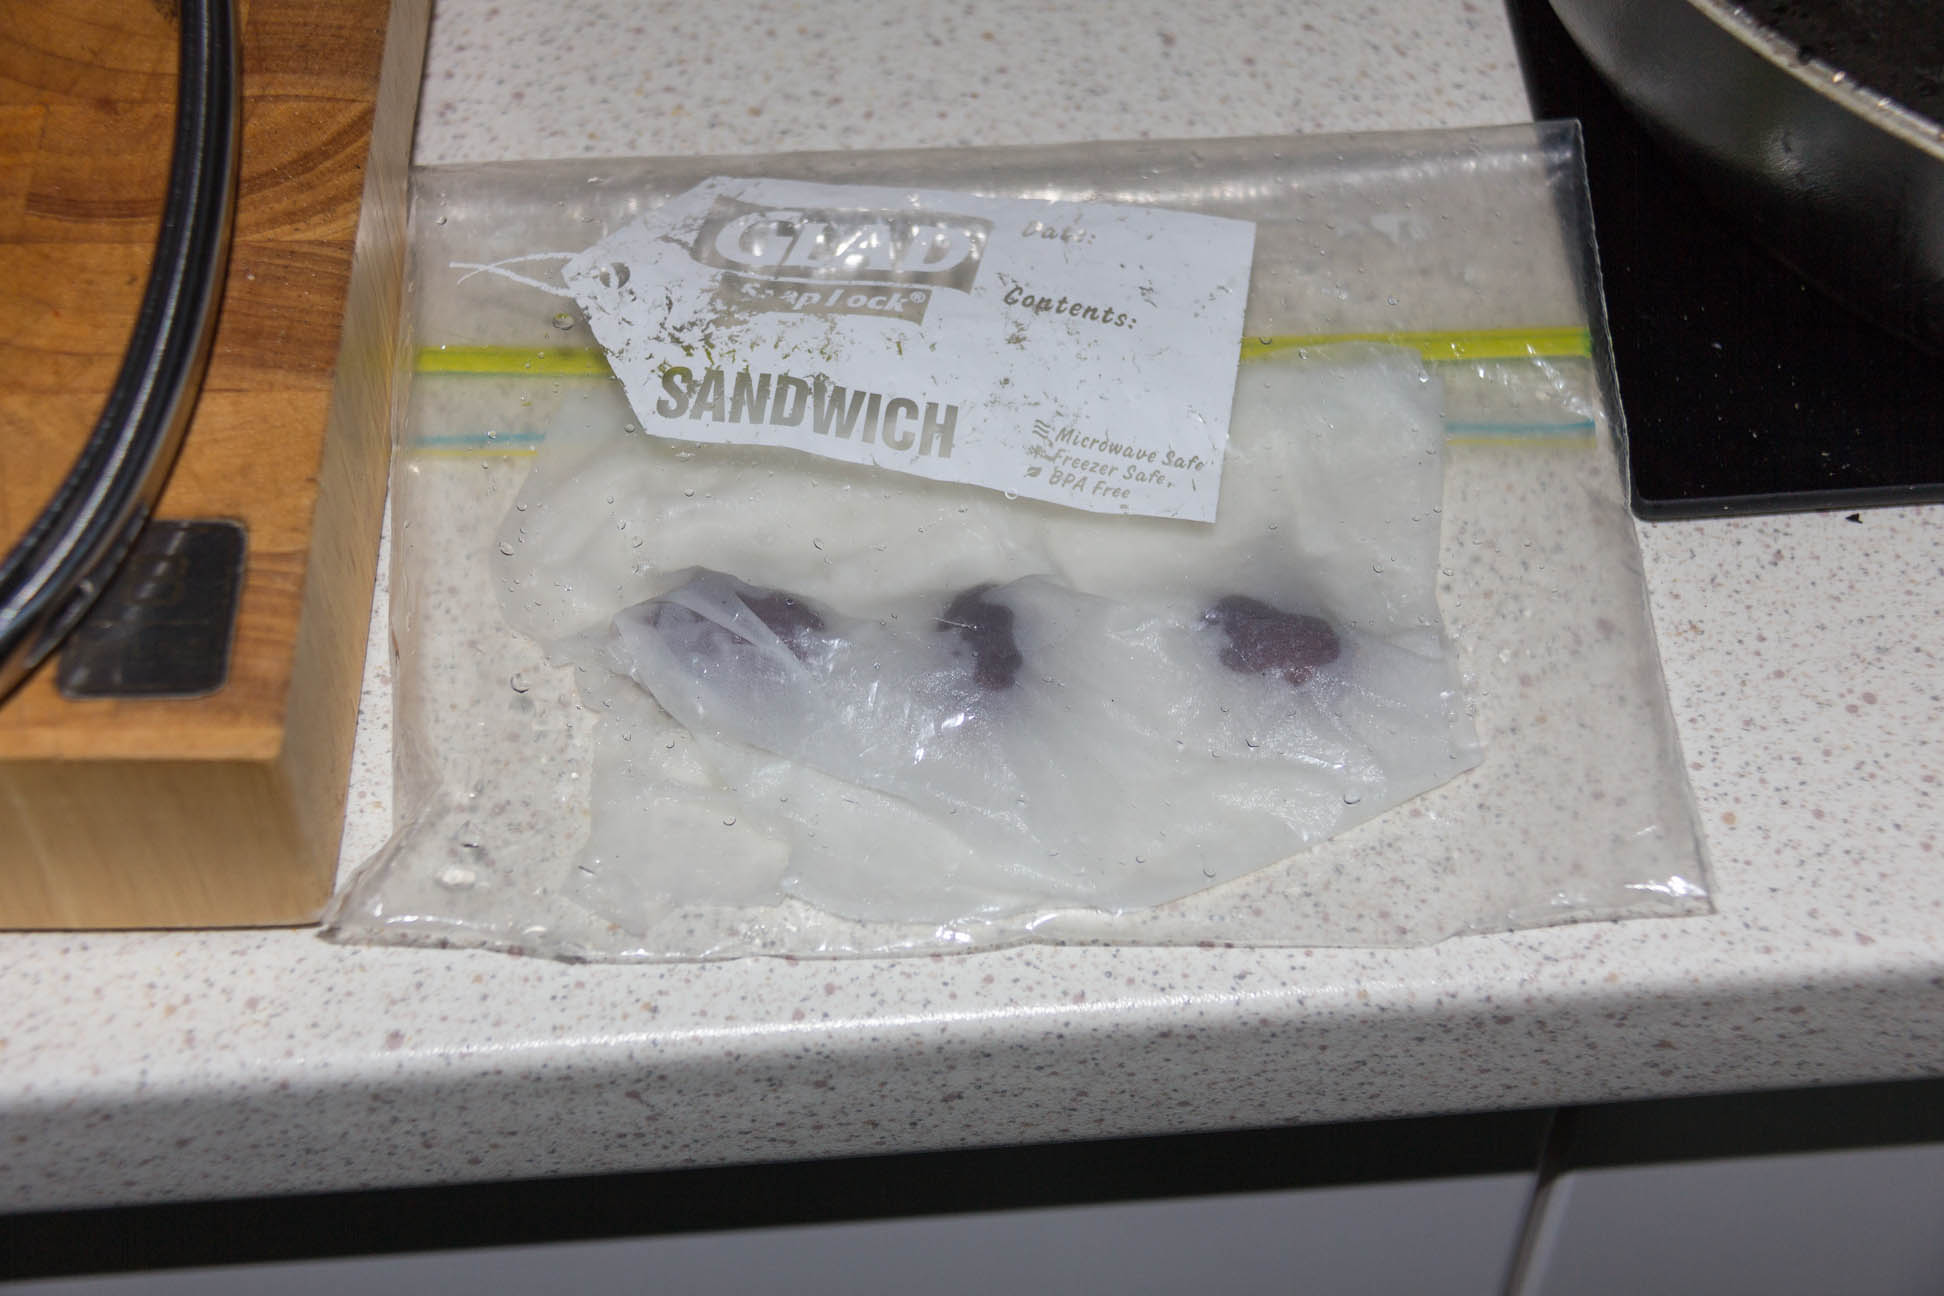 01/01/15 Day 1: Lychee seed germination experimentation Put fresh seeds into a zip lock bag with damp paper towel in a dark warm place [a cupboard above the microwave]